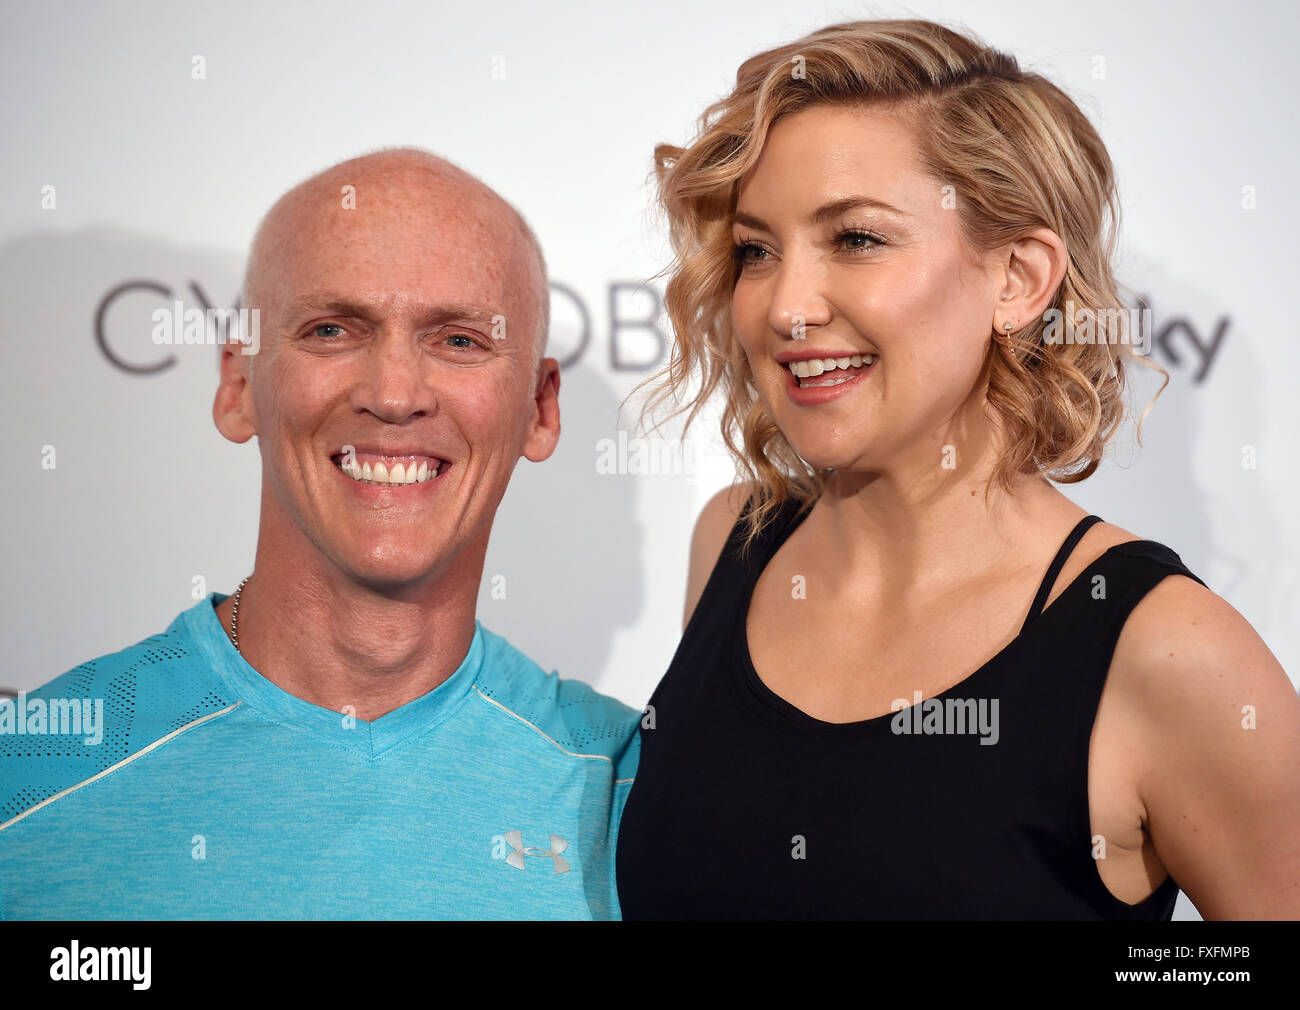 Berlin, Germany. 14th Apr, 2016. US actor Kate Hudson and US fitness coach David Kirsch pose at the fitness studio 'World of Cyberobics' in Berlin, Germany, 14 April 2016. The fitness arena will open on 18 April 2016. Photo: Britta Pedersen/dpa/Alamy Live News Stock Photo